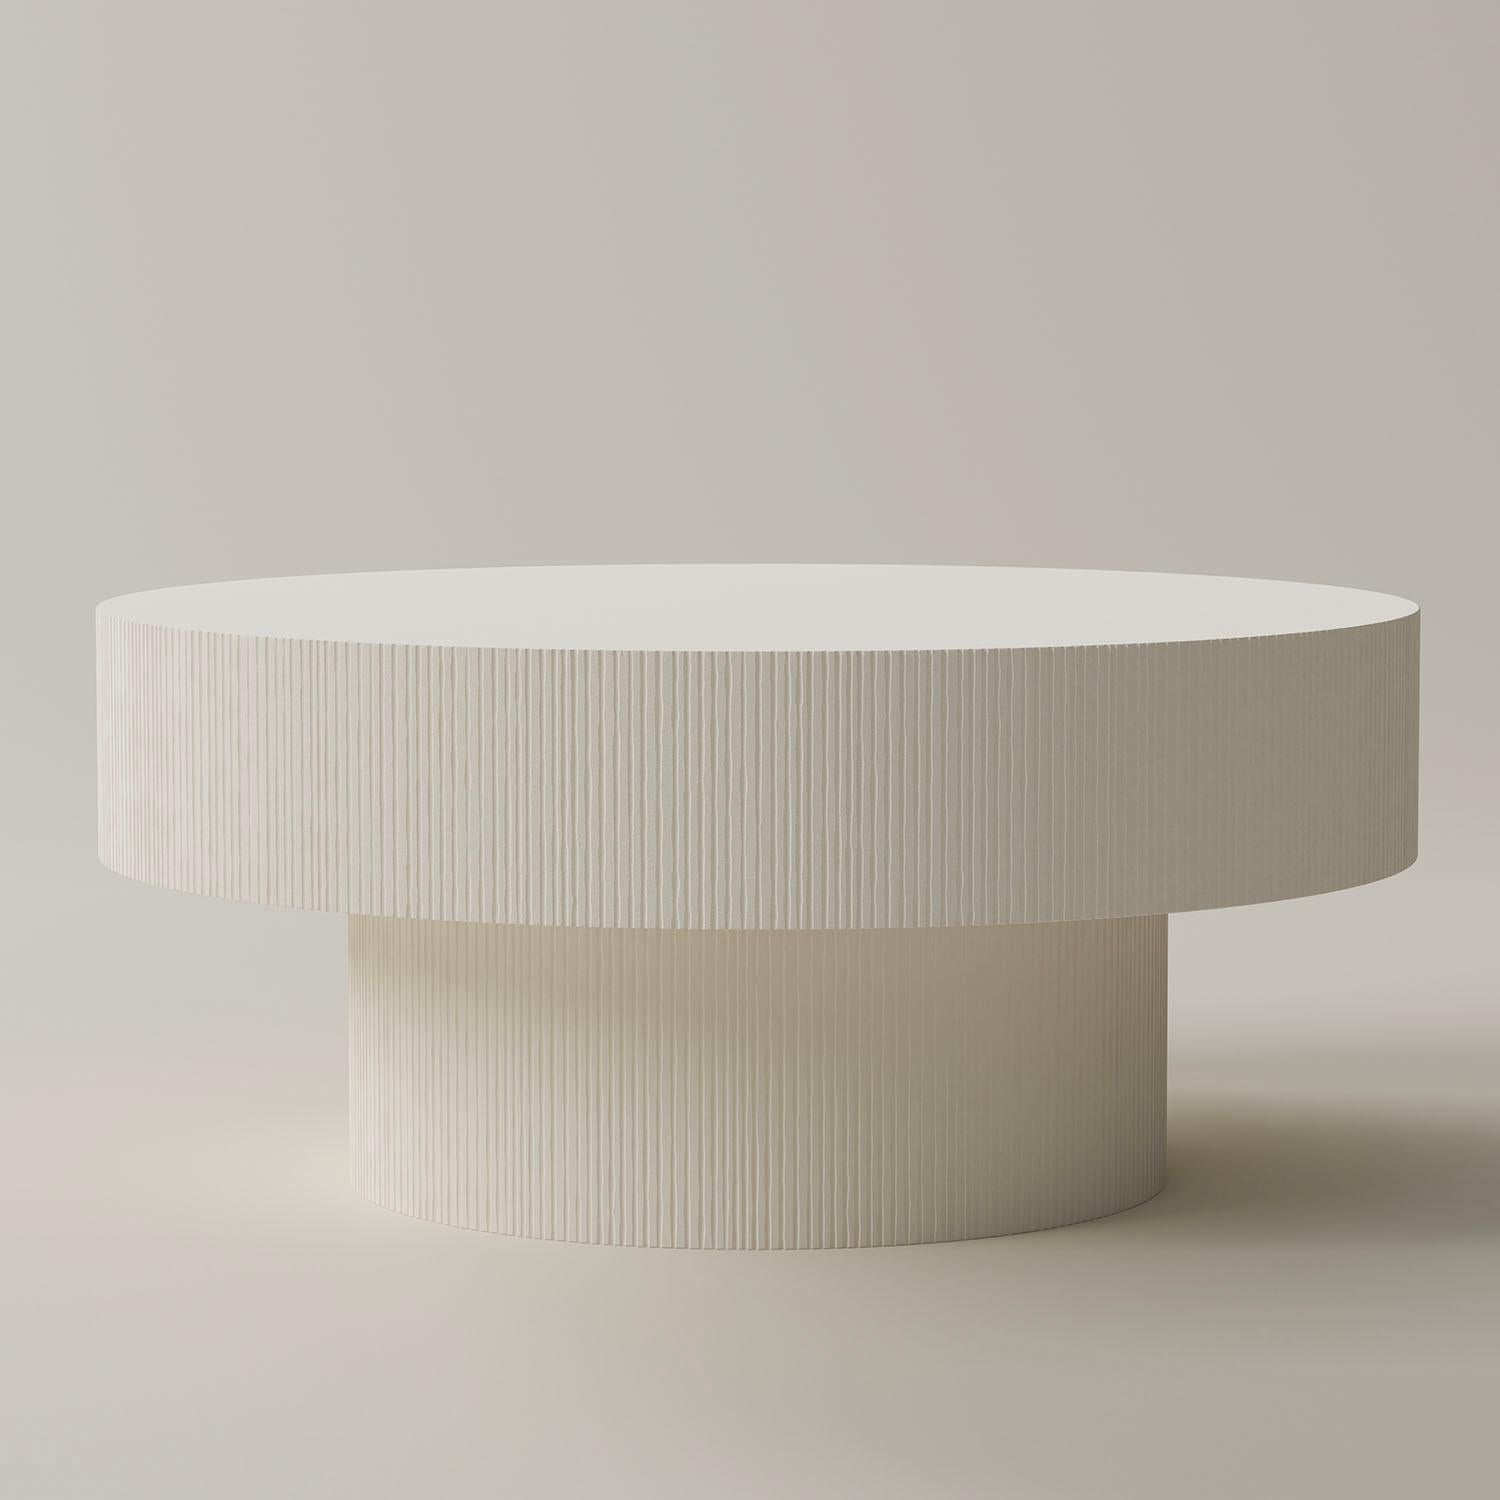 Contemporary Jesmonite coffee table - Pilotis carved table by Malgorzata Bany.

Pilotis carved table, a multifunctional statement piece crafted from Jesmonite. The latest addition to the ‘Pilotis’ range, the table encompasses the pure, clean